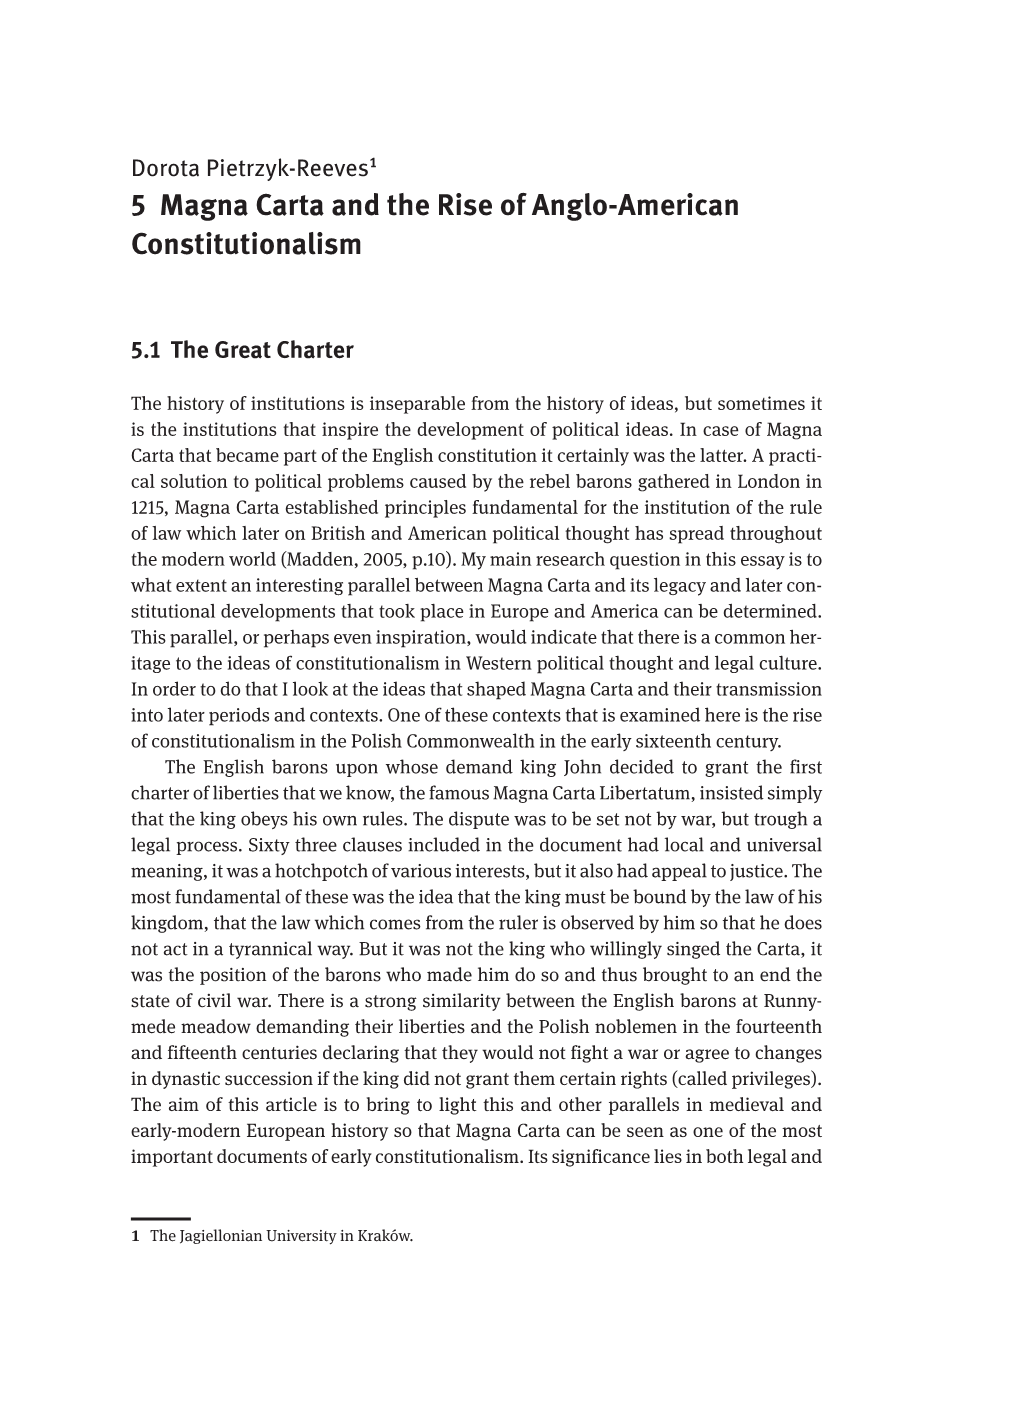 5 Magna Carta and the Rise of Anglo-American Constitutionalism